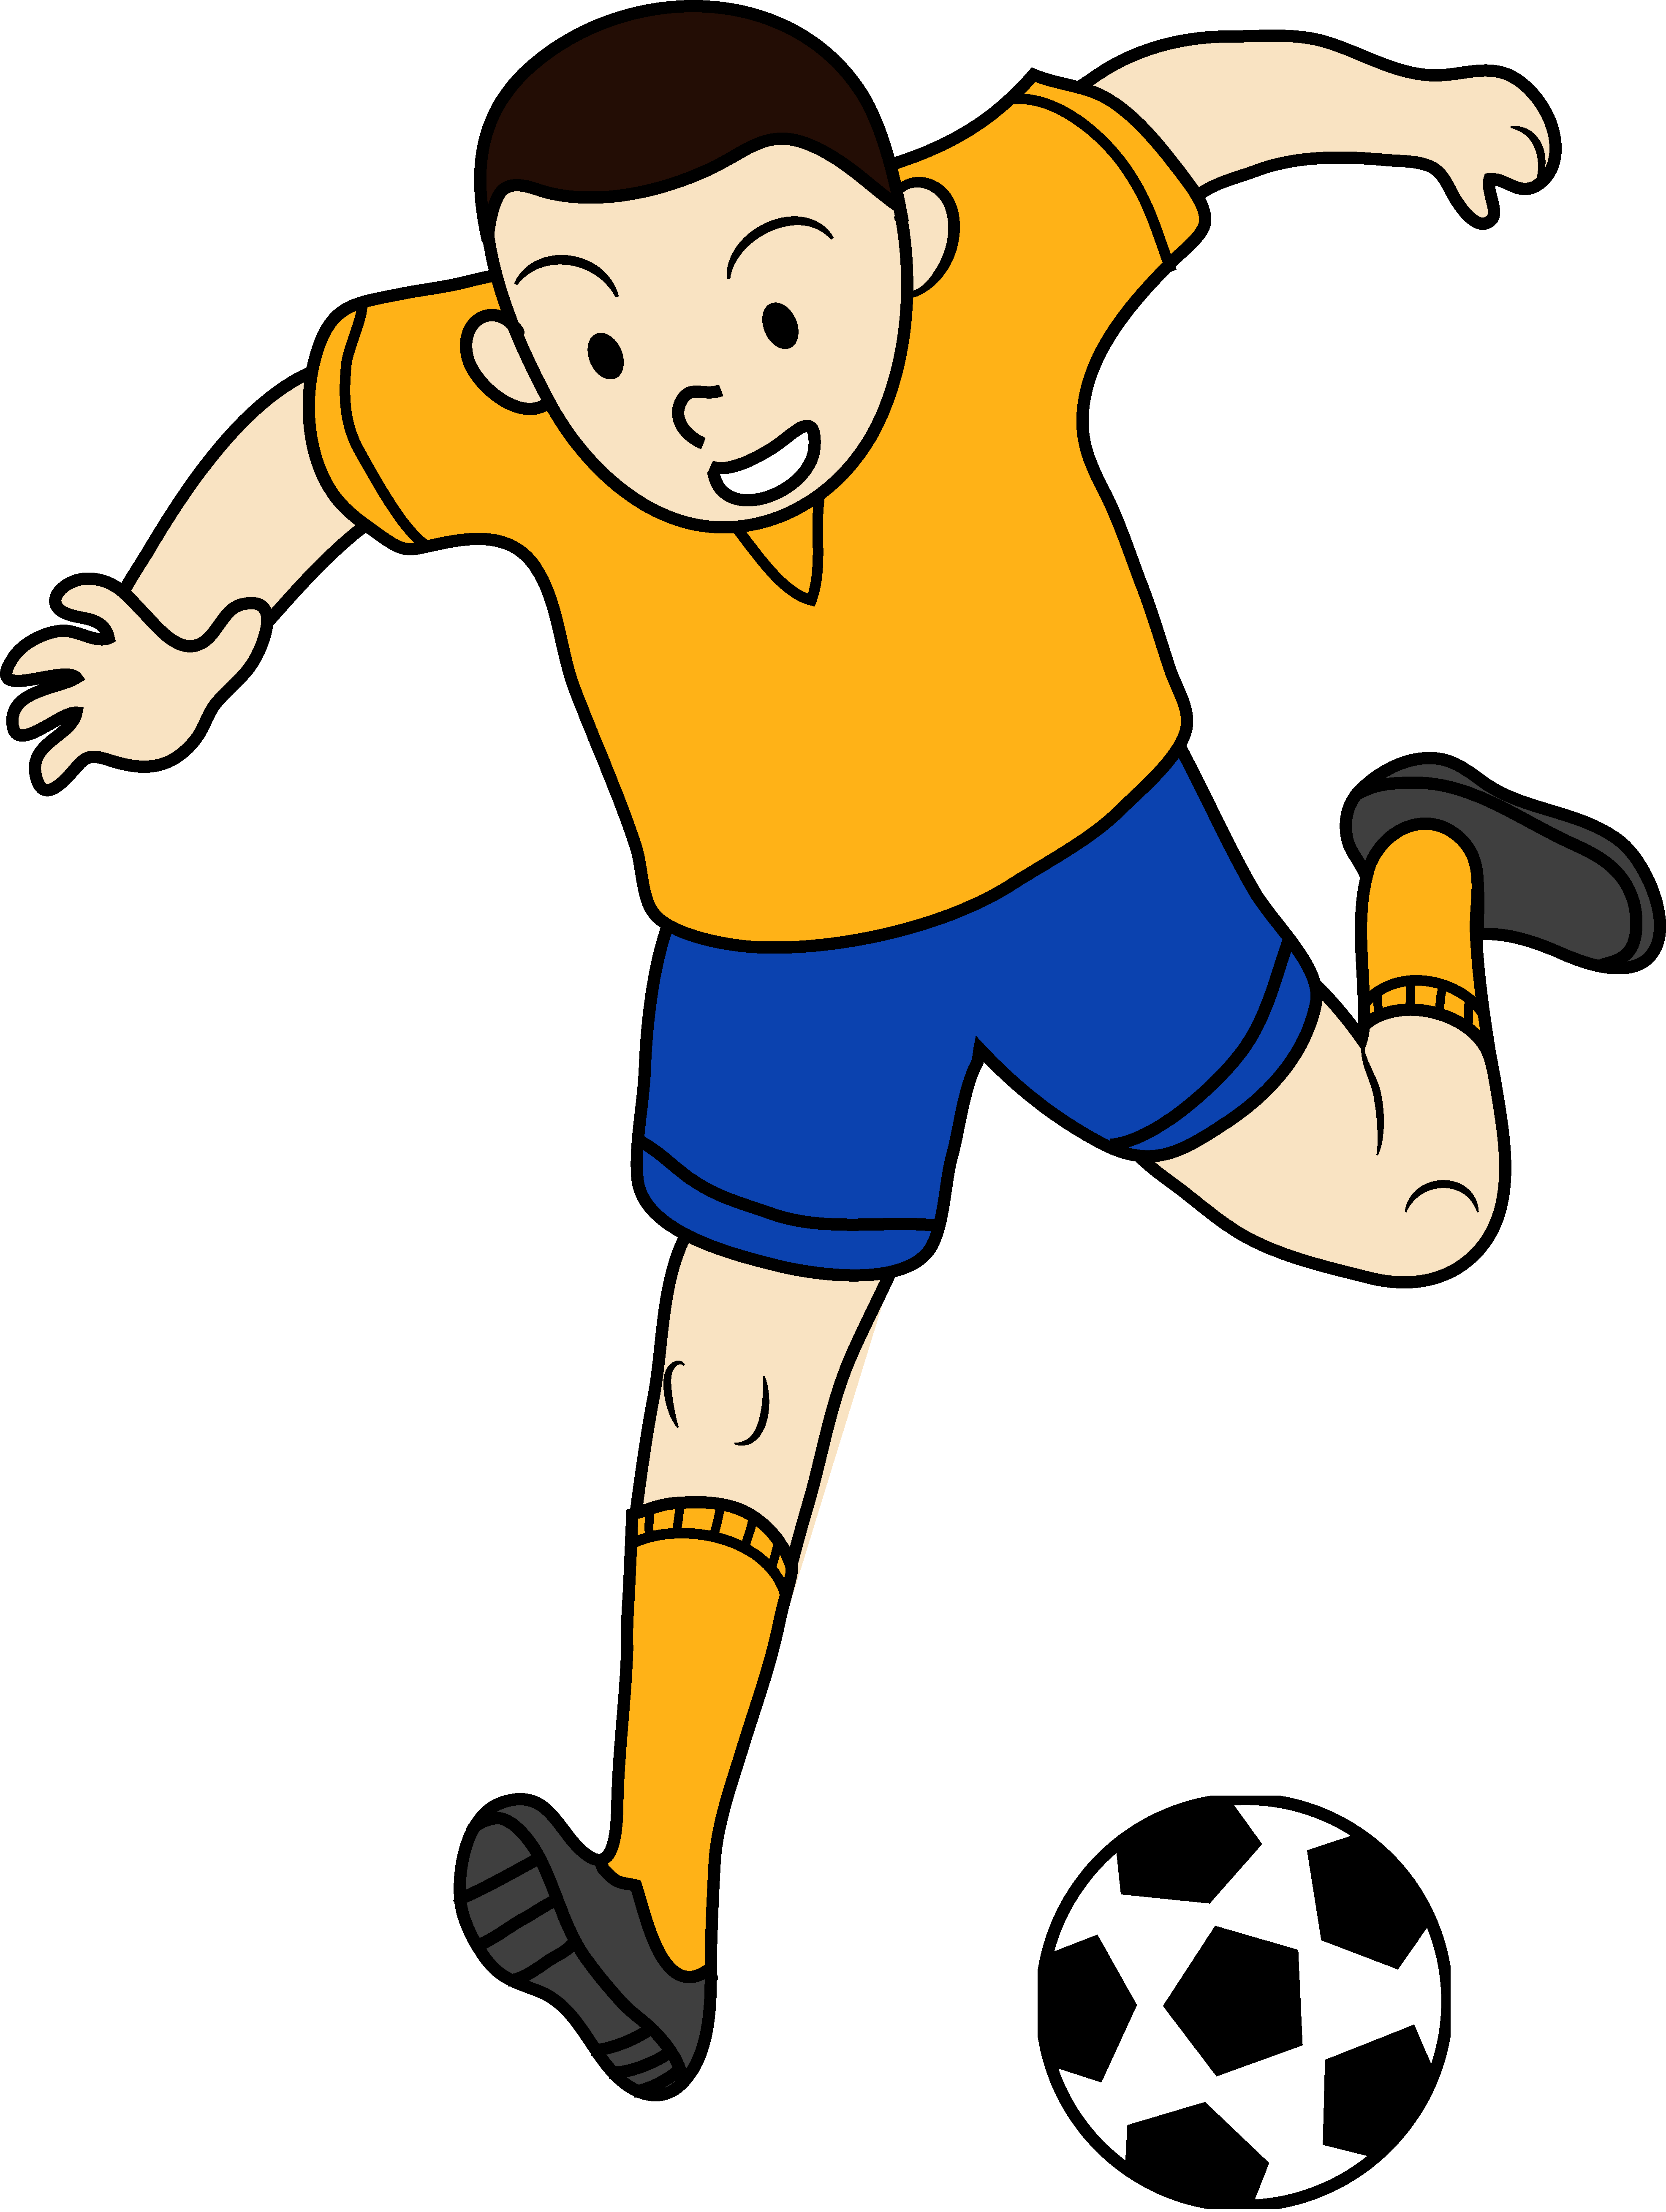 Kids Soccer Ball Clipart - Free Clipart Images